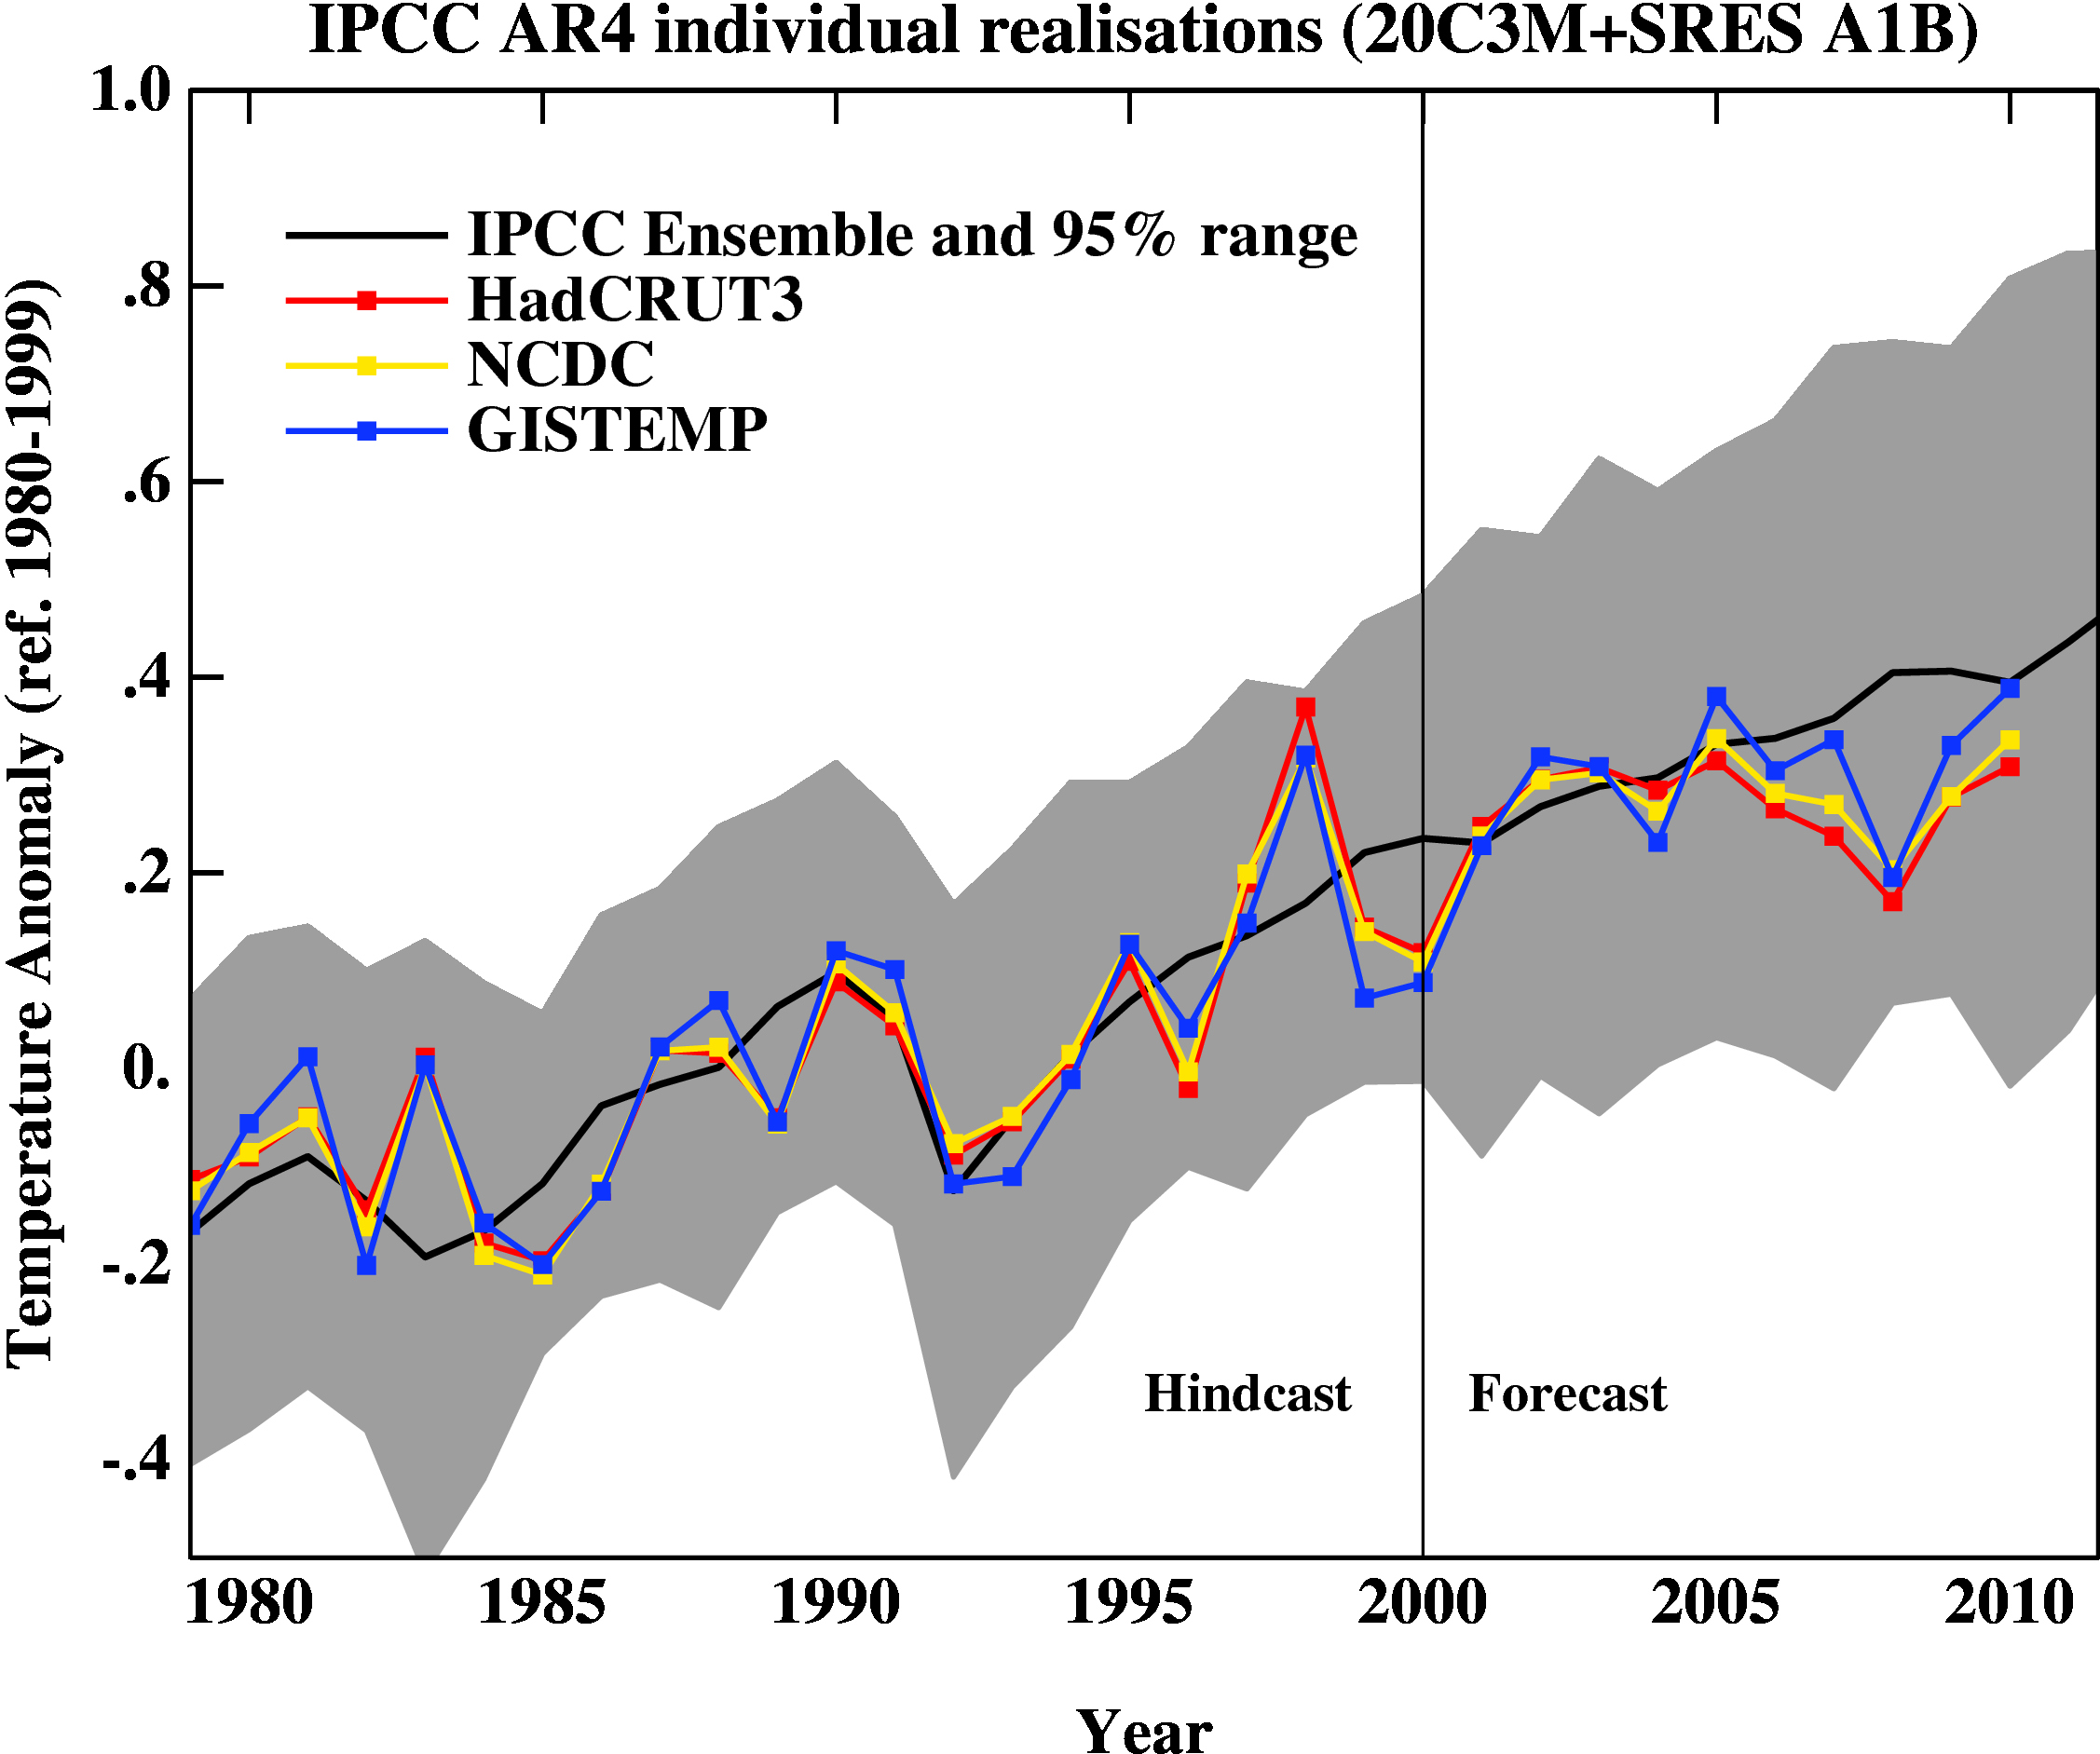 Observed global temperatures since 1980 compared to IPCC AR4 model projections